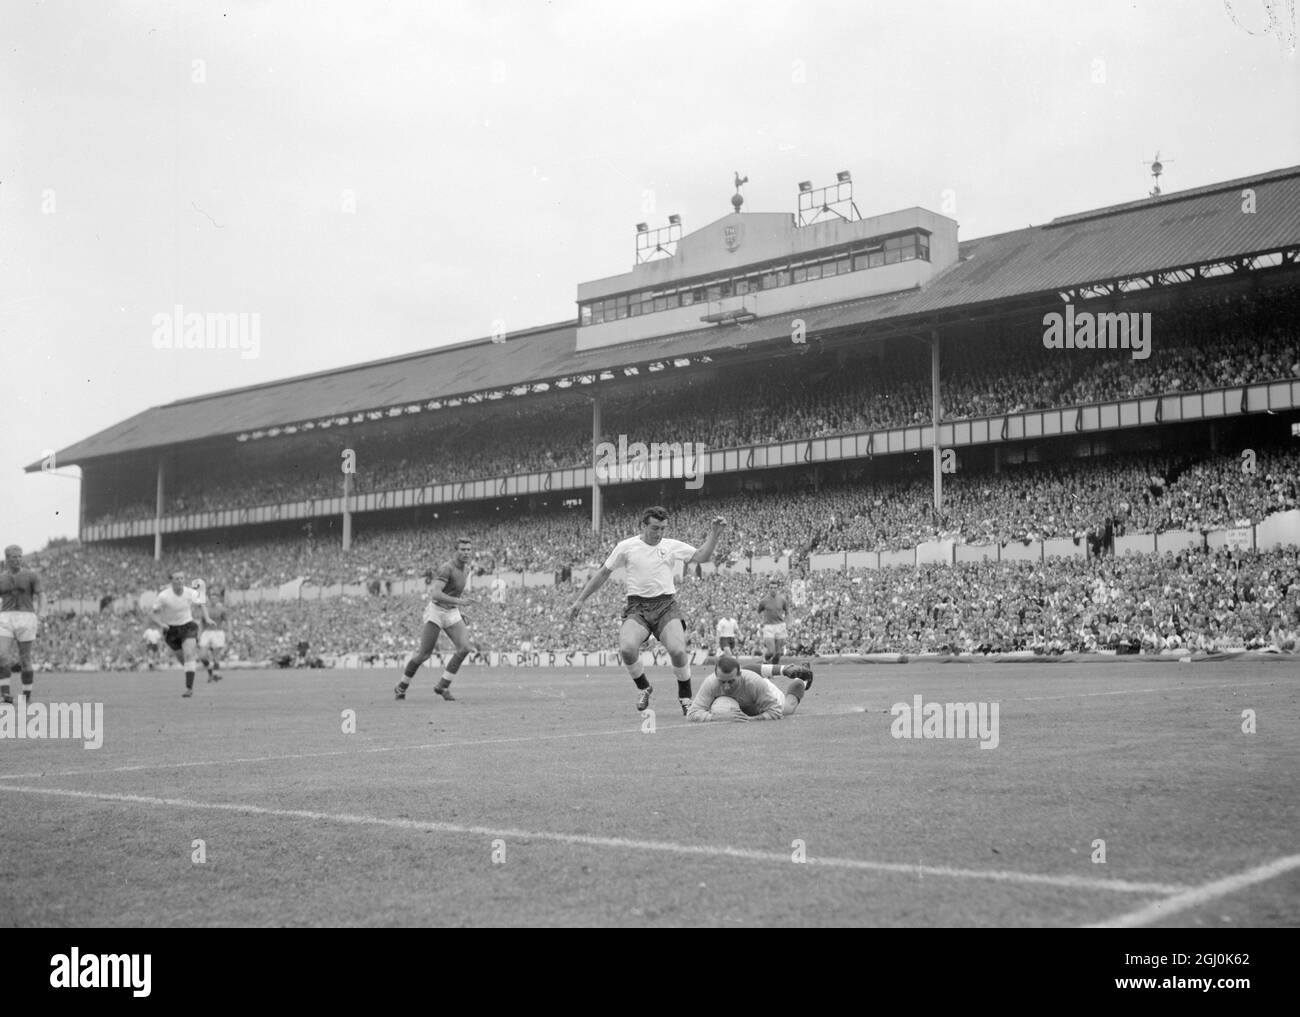 London: FA Selection XI goalie Springett dives to the ground to get the ball as Spurs centre-forward Bobby Smith gets ready for a kick at the goal during the 'Spurs-FA Selection friendly game at White Hart lane this afternoon. 'Spurs, the FA Cup winners and League Championship winners, won 3 -2. 12 August 1961 Stock Photo